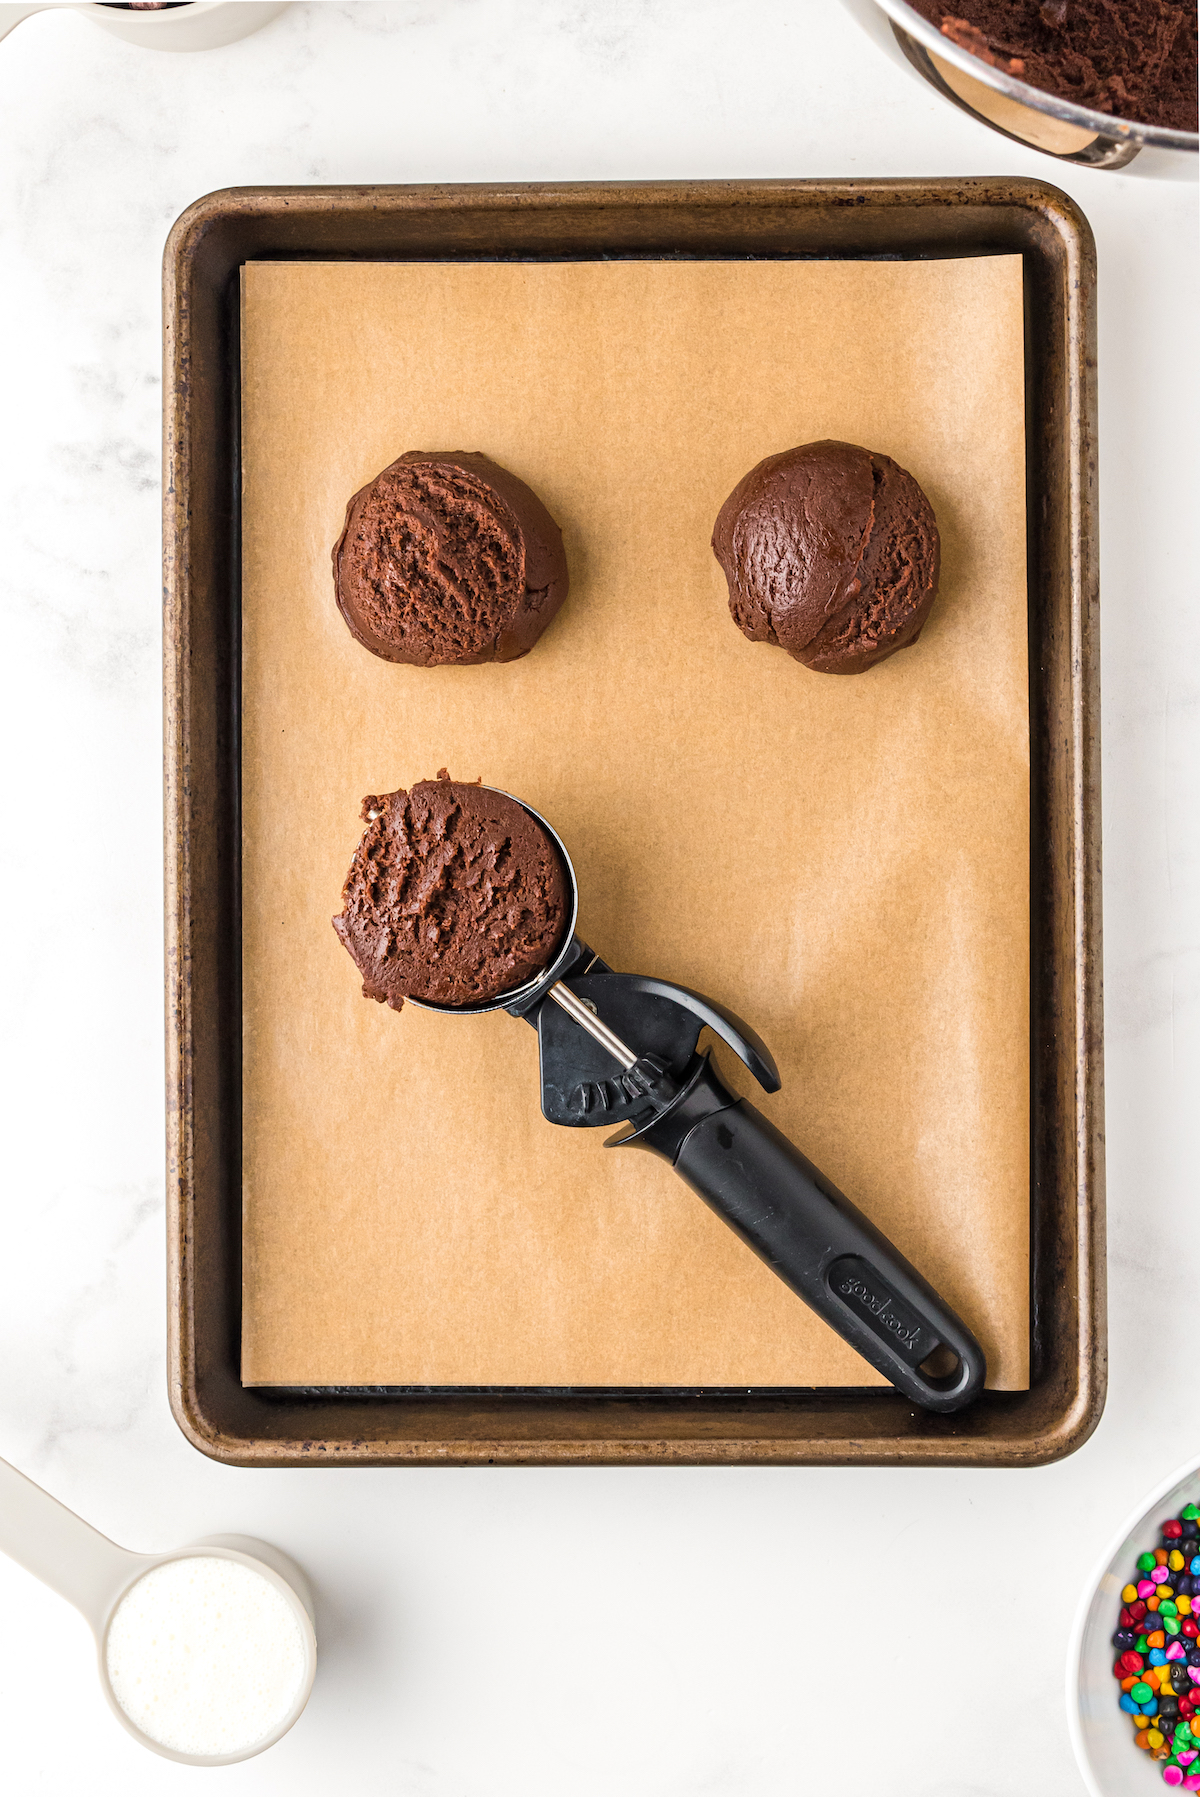 Scoops of cookie dough on a baking sheet with a cookie scoop.